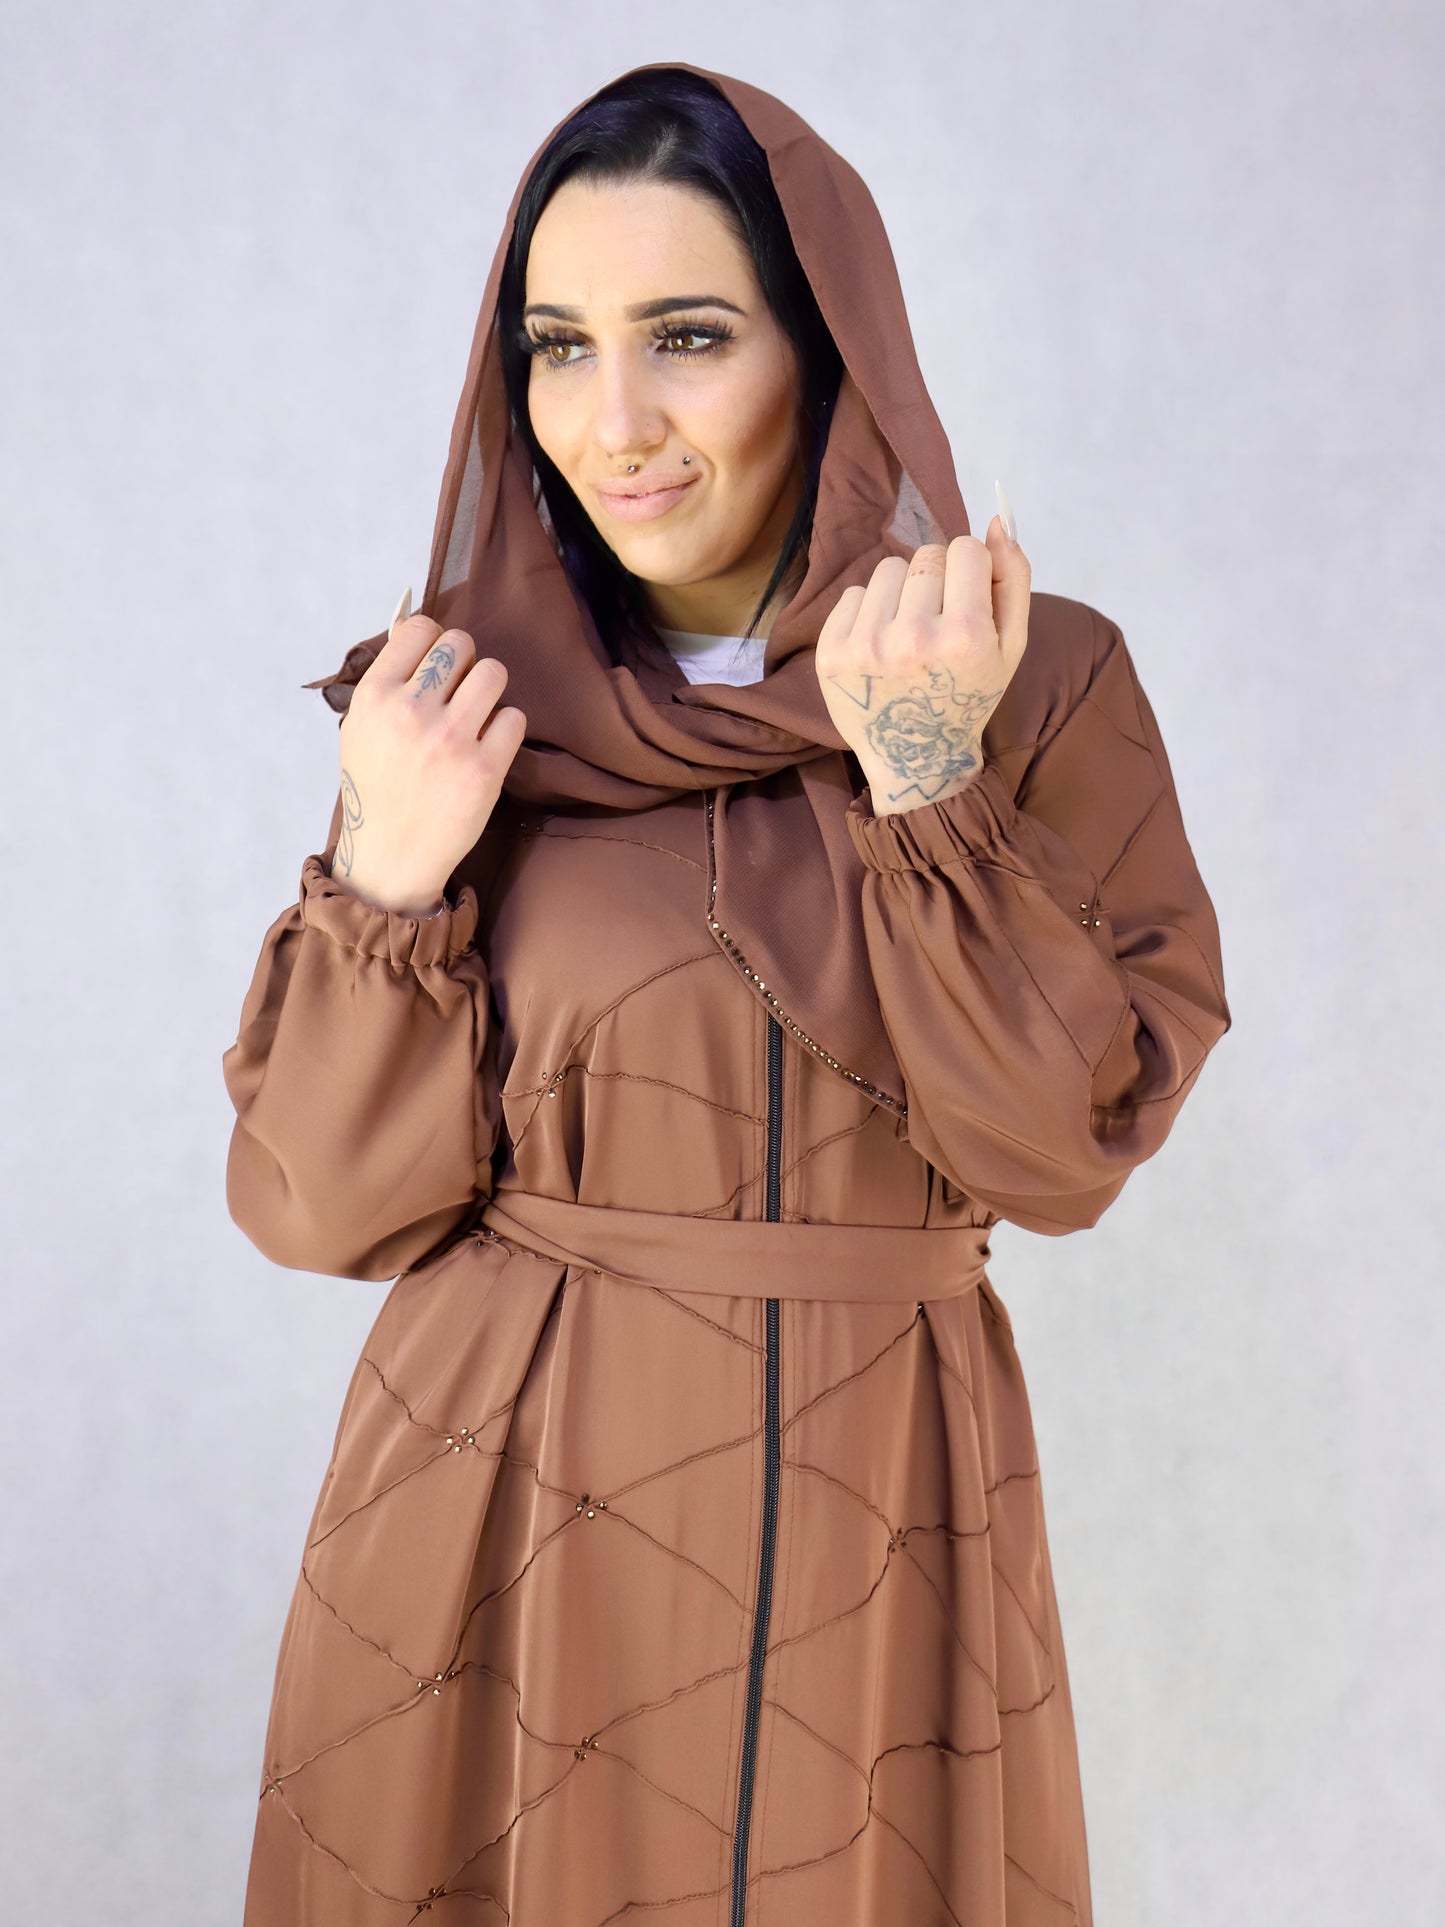 Brown color open abaya with zip going down Modest abaya,abaya, abayas,modest abaya dress, modest dresses, black abaya, modest dress, abaya united kingdom, white abaya, abaya for women, modest dresses for women, modest maxi dresses, women abaya, abaya dress dresses, abayas for women, jilbab abaya islamic clothing modest clothing for women modest clothing dresses